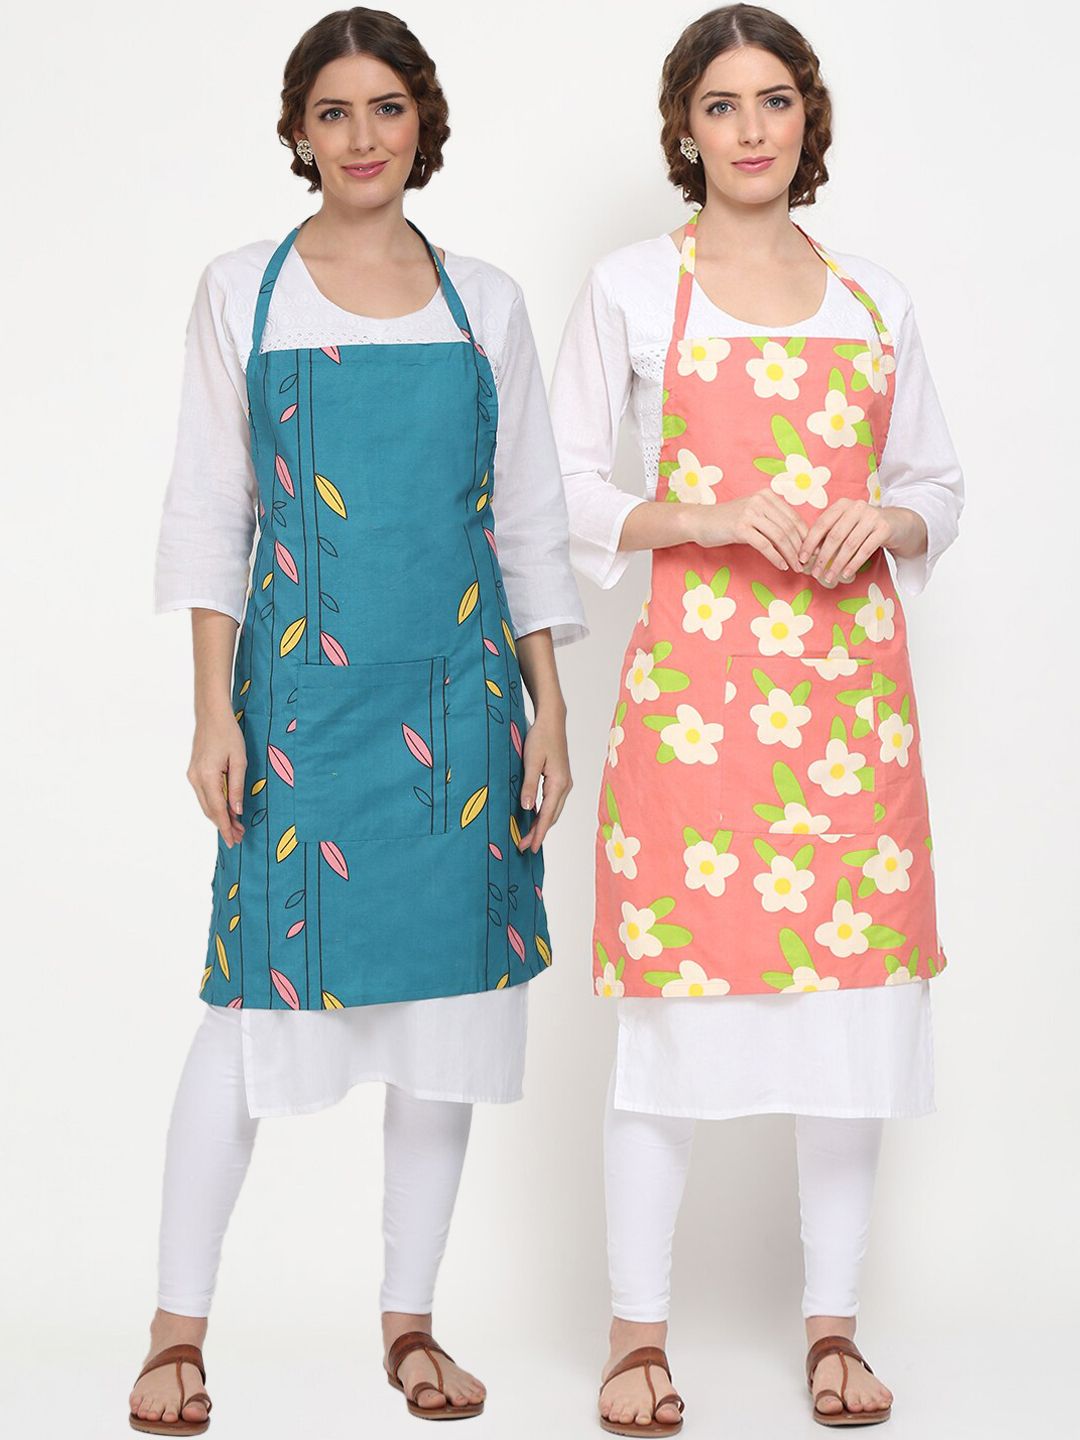 TAG 7 Pack of 2 Printed Aprons Price in India